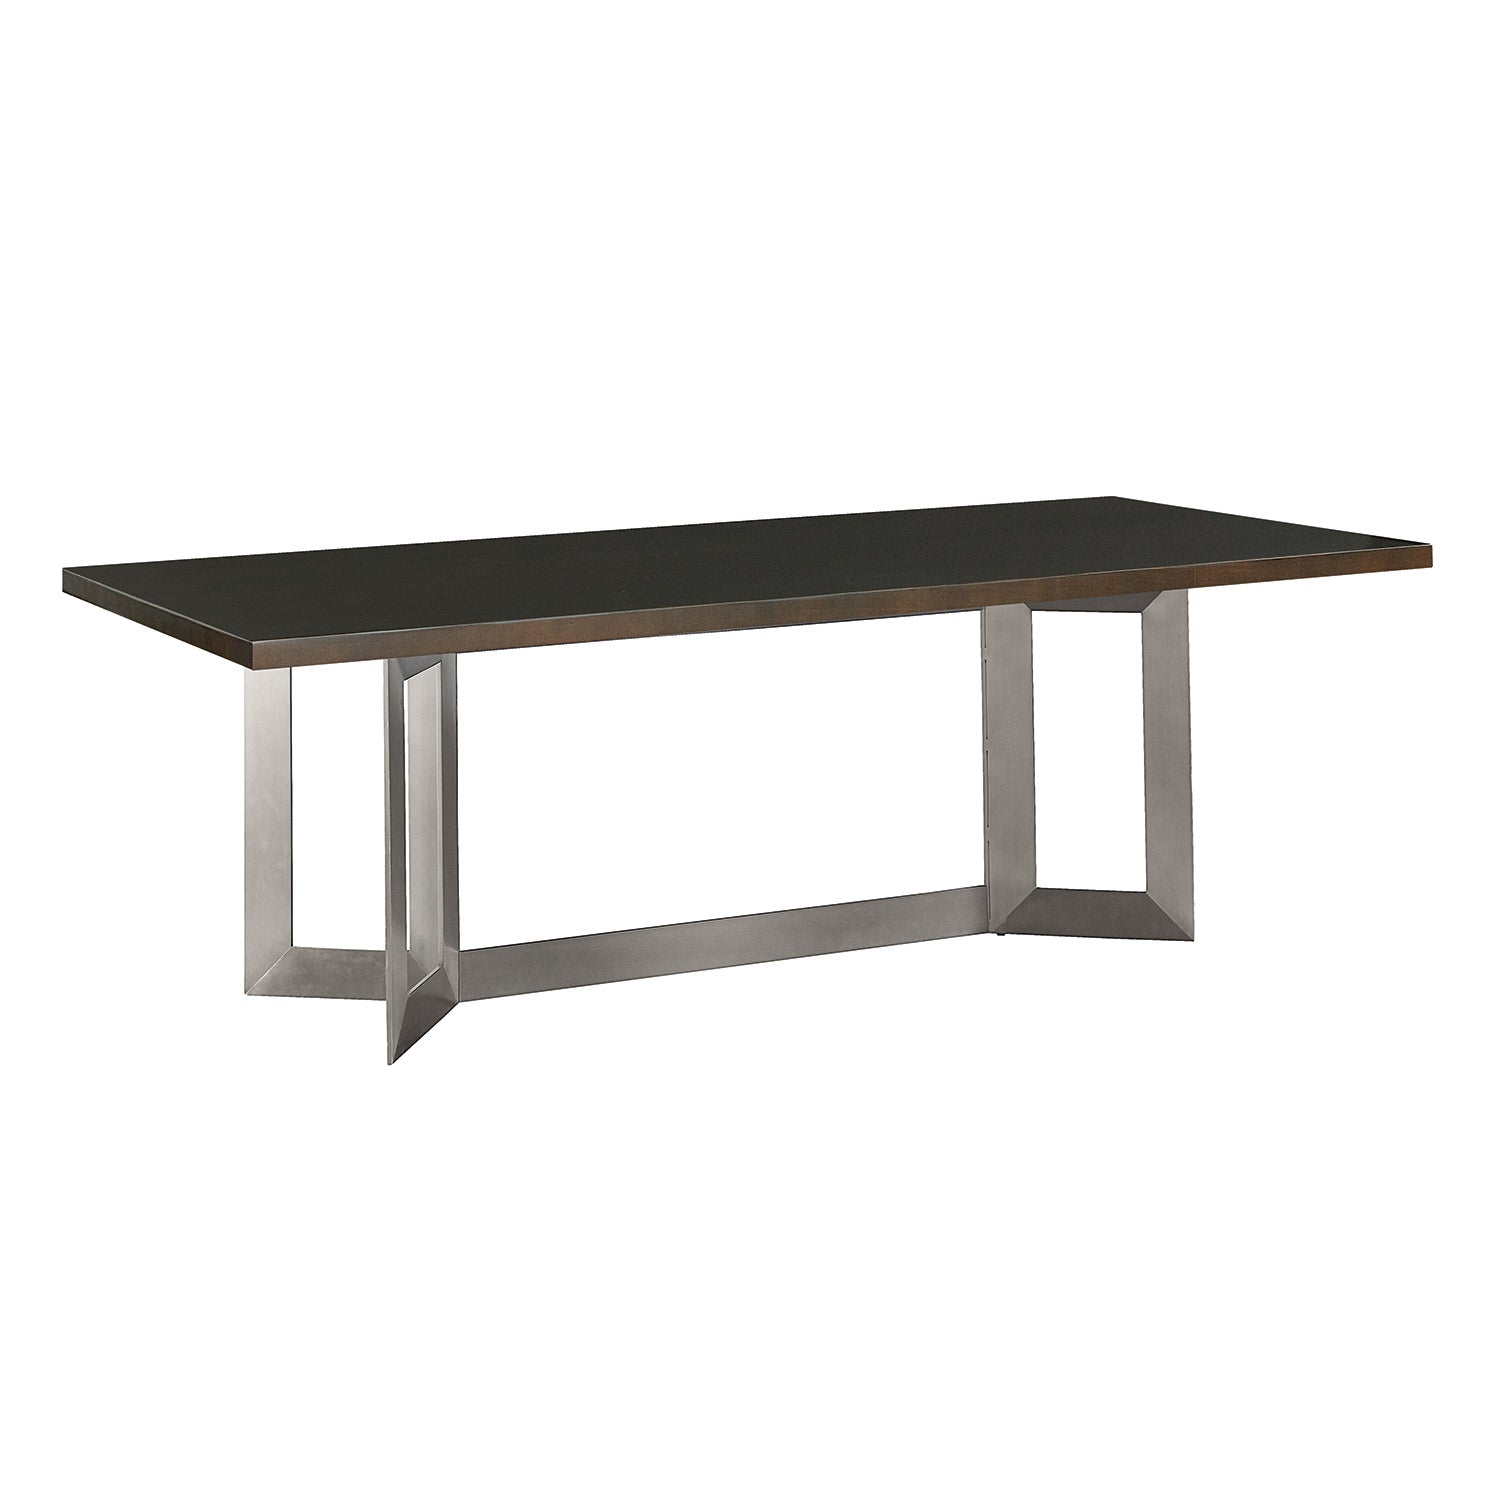 Astor Solid Maple Live Edge Dining Table